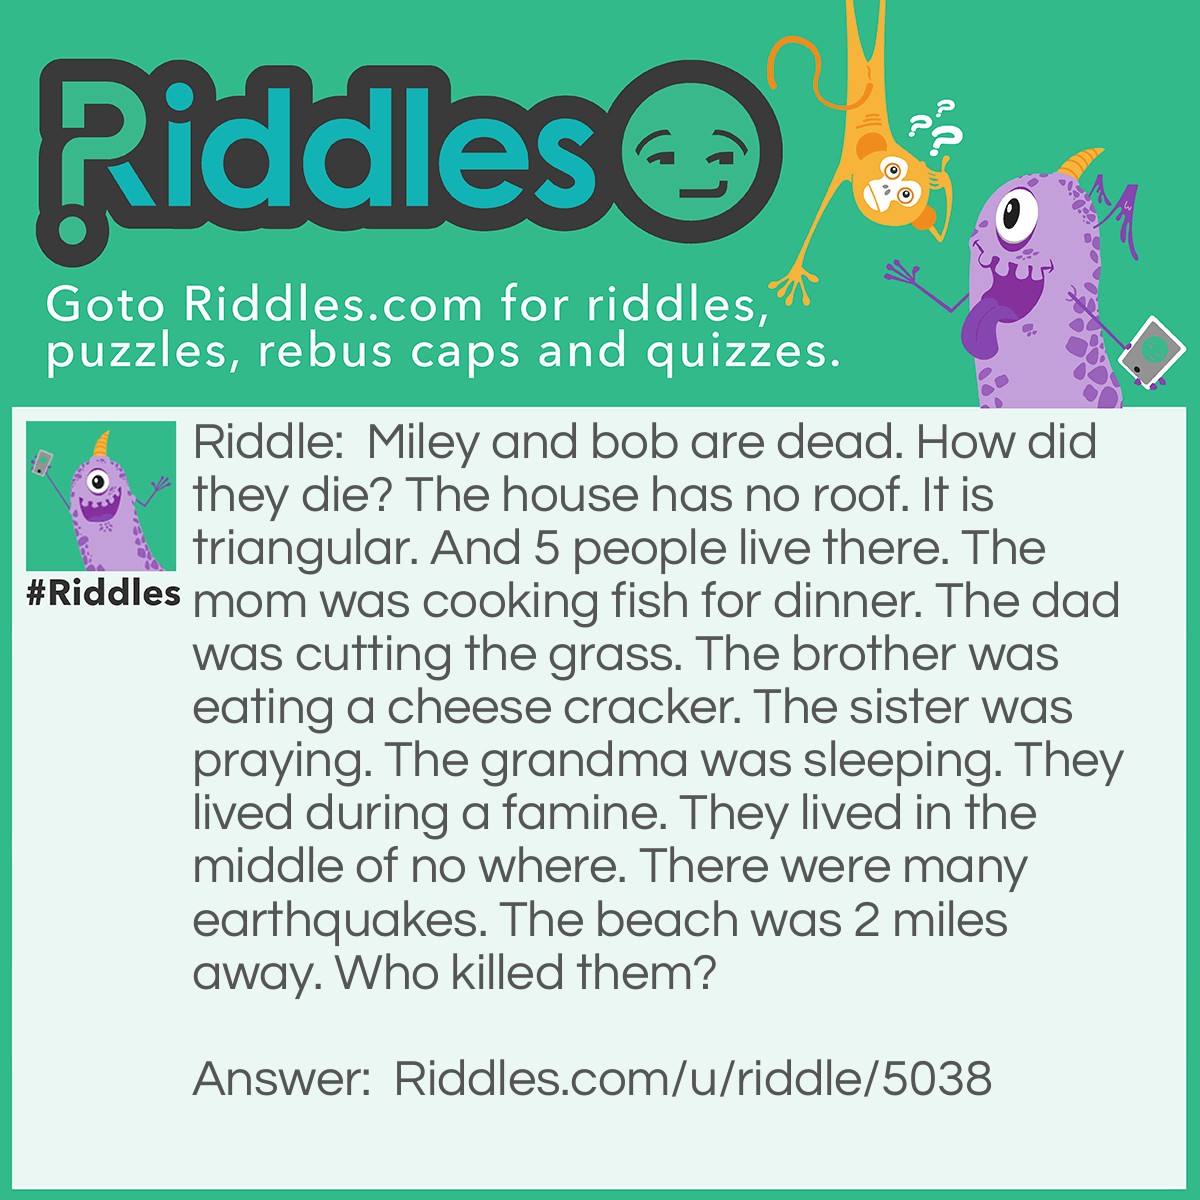 Riddle: Miley and bob are dead. How did they die? The house has no roof. It is triangular. And 5 people live there. The mom was cooking fish for dinner. The dad was cutting the grass. The brother was eating a cheese cracker. The sister was praying. The grandma was sleeping. They lived during a famine. They lived in the middle of no where. There were many earthquakes. The beach was 2 miles away. Who killed them? Answer: The mom. She was cooking them they were pet fish. And they had no food to eat.